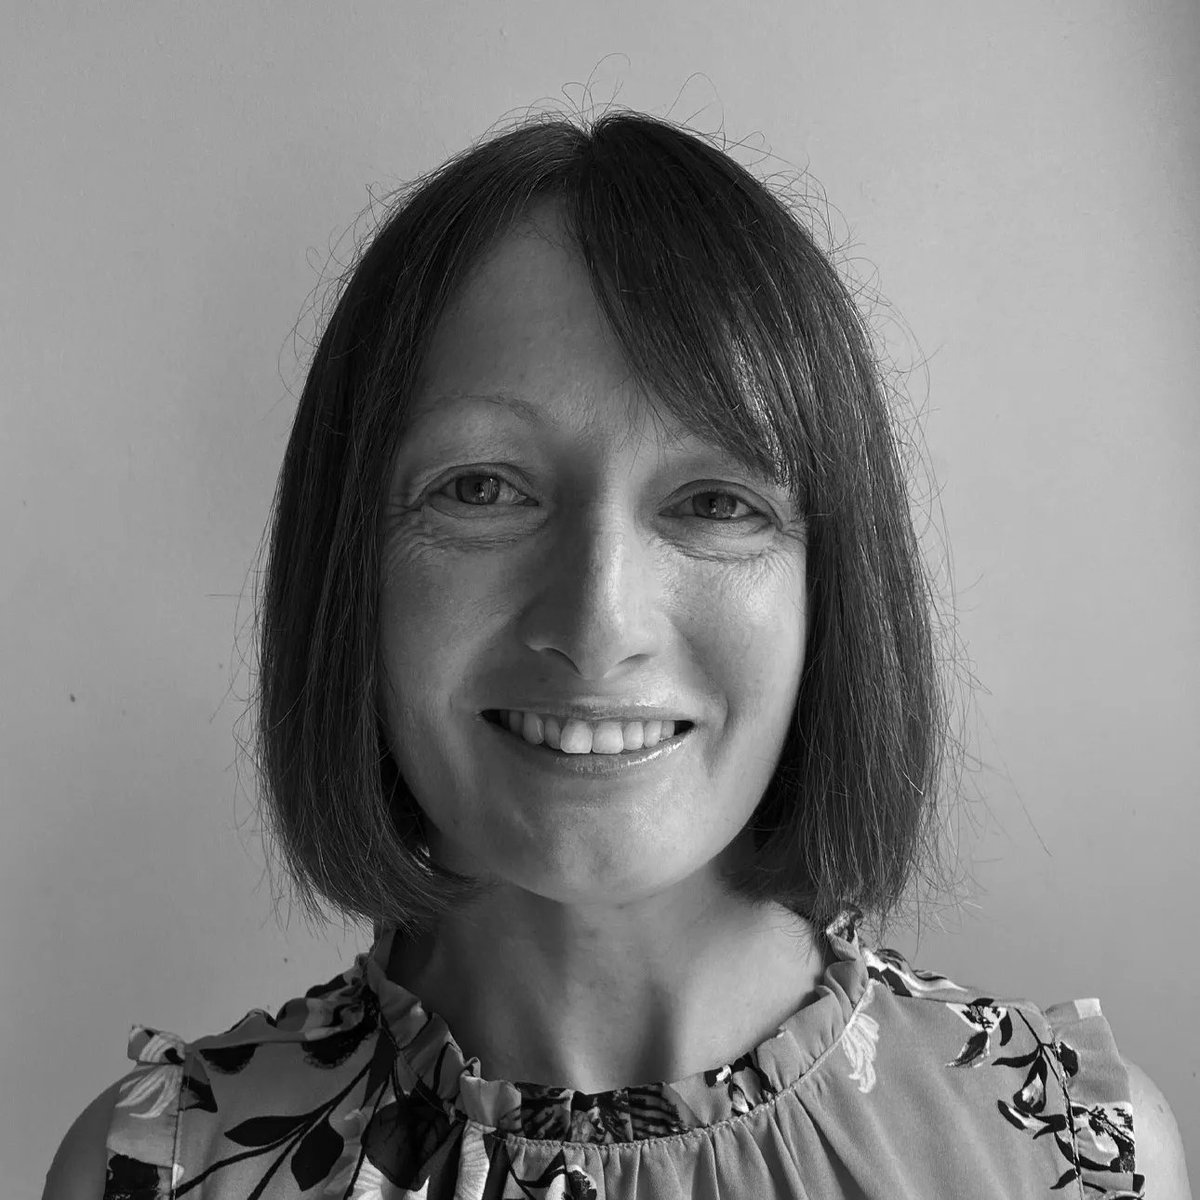 Jenny Swift

'Director of Kerning & Digital Acrobat' (Senior Design Manager), Jenny has over 15 years' experience most of which gained through working for a national charity. 
 
Find out more about Jenny here: https://t.co/TaM1TJwXXs

#MeettheTeam #SeniorDesignManager #Designer https://t.co/dDo8VDFYq1